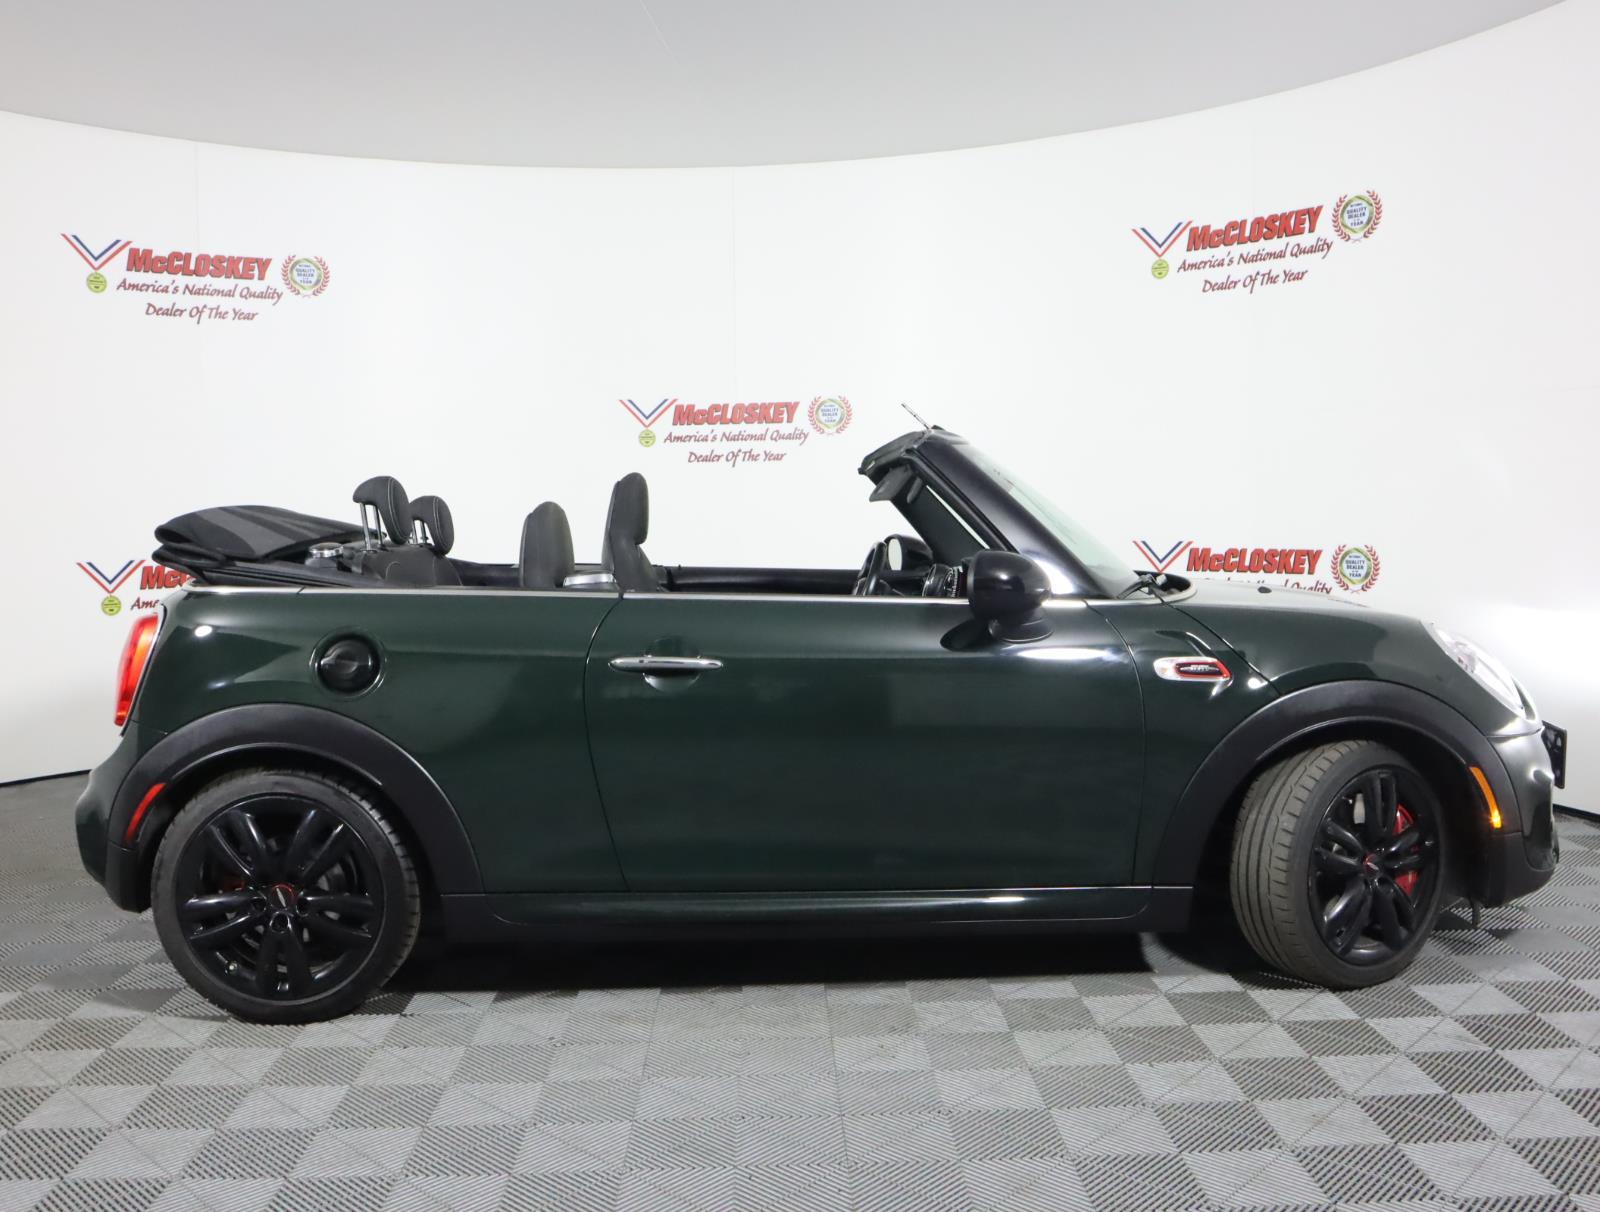 Preowned 2017 MINI Cooper Convertible John Cooper Works for sale by McCloskey Imports & 4X4's in Colorado Springs, CO